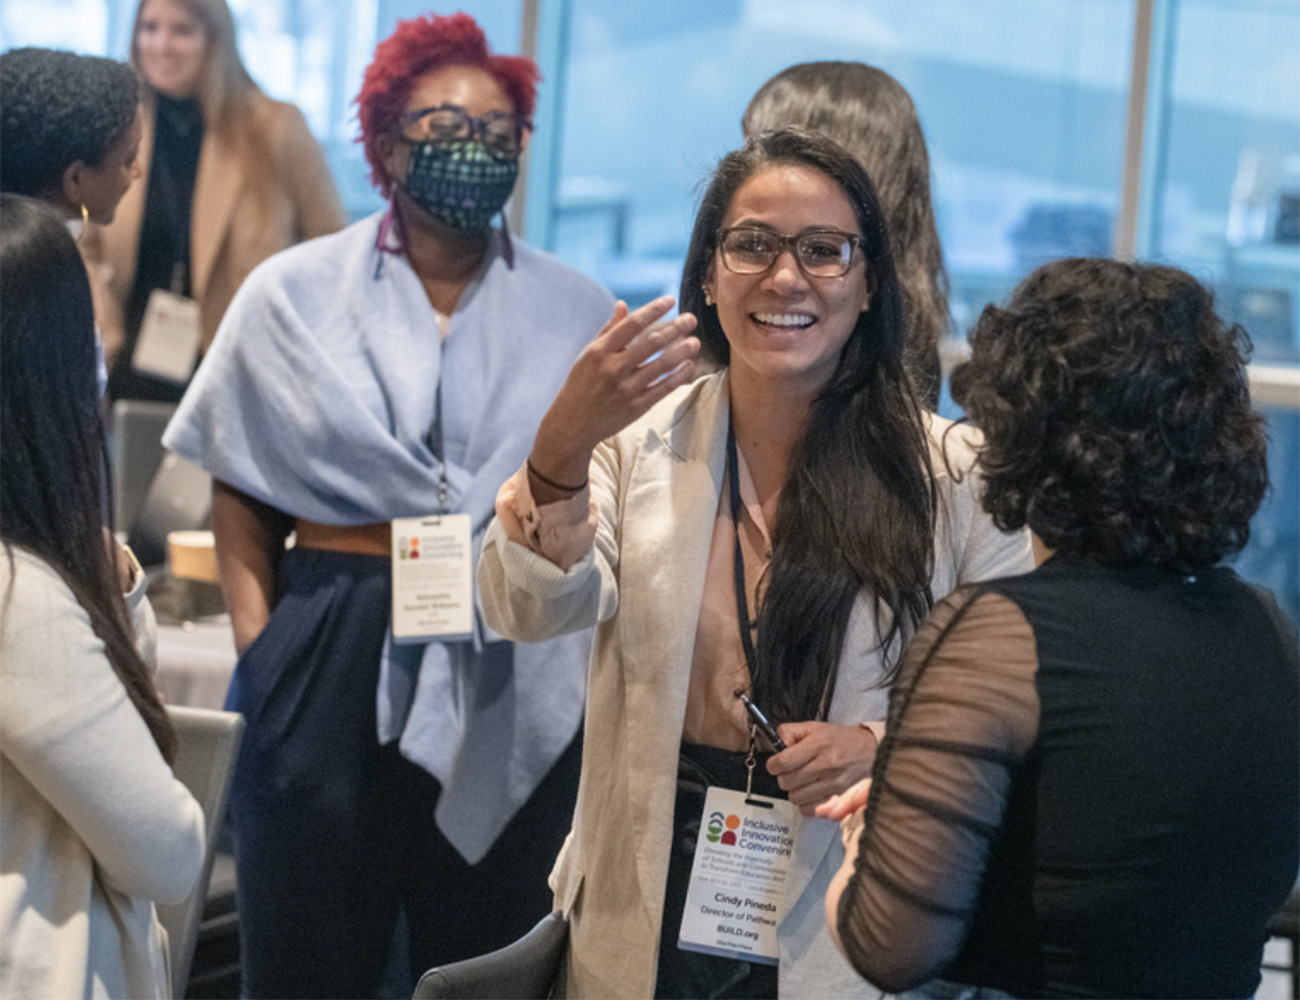 A woman at the Inclusive Innovation convening smiles and waves to someone out of frame